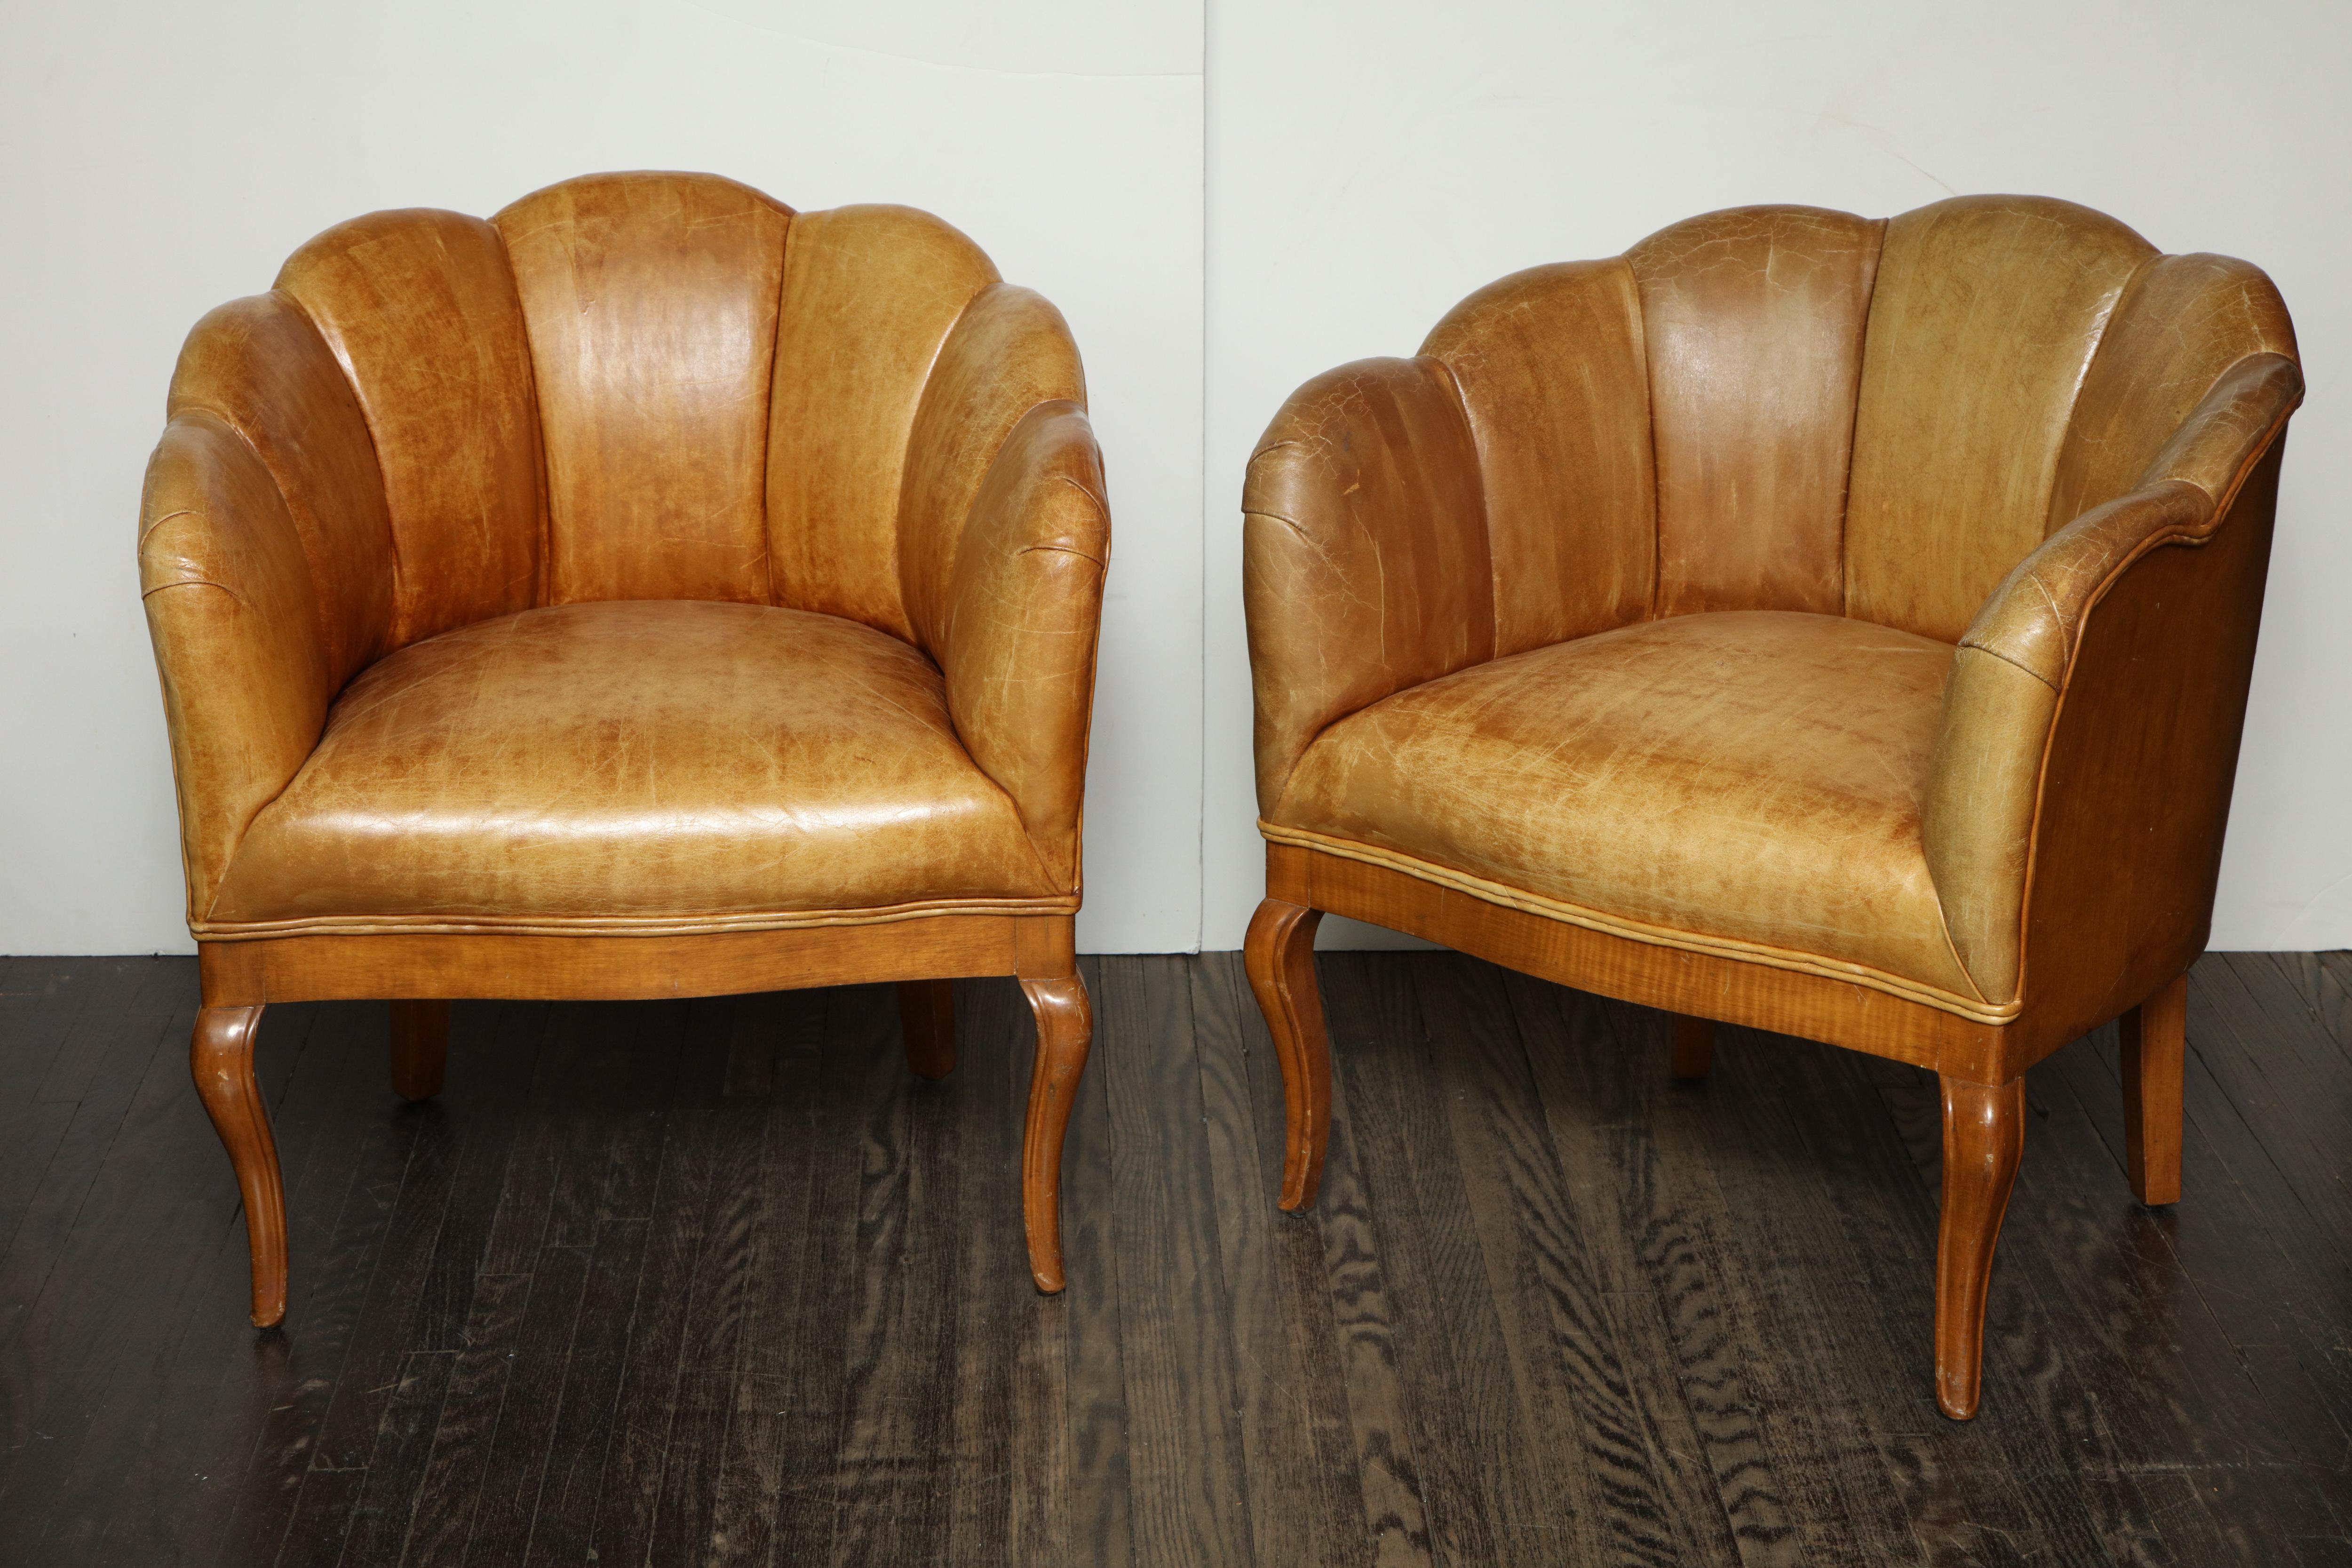 Pair of vintage leather channel back petite chairs.